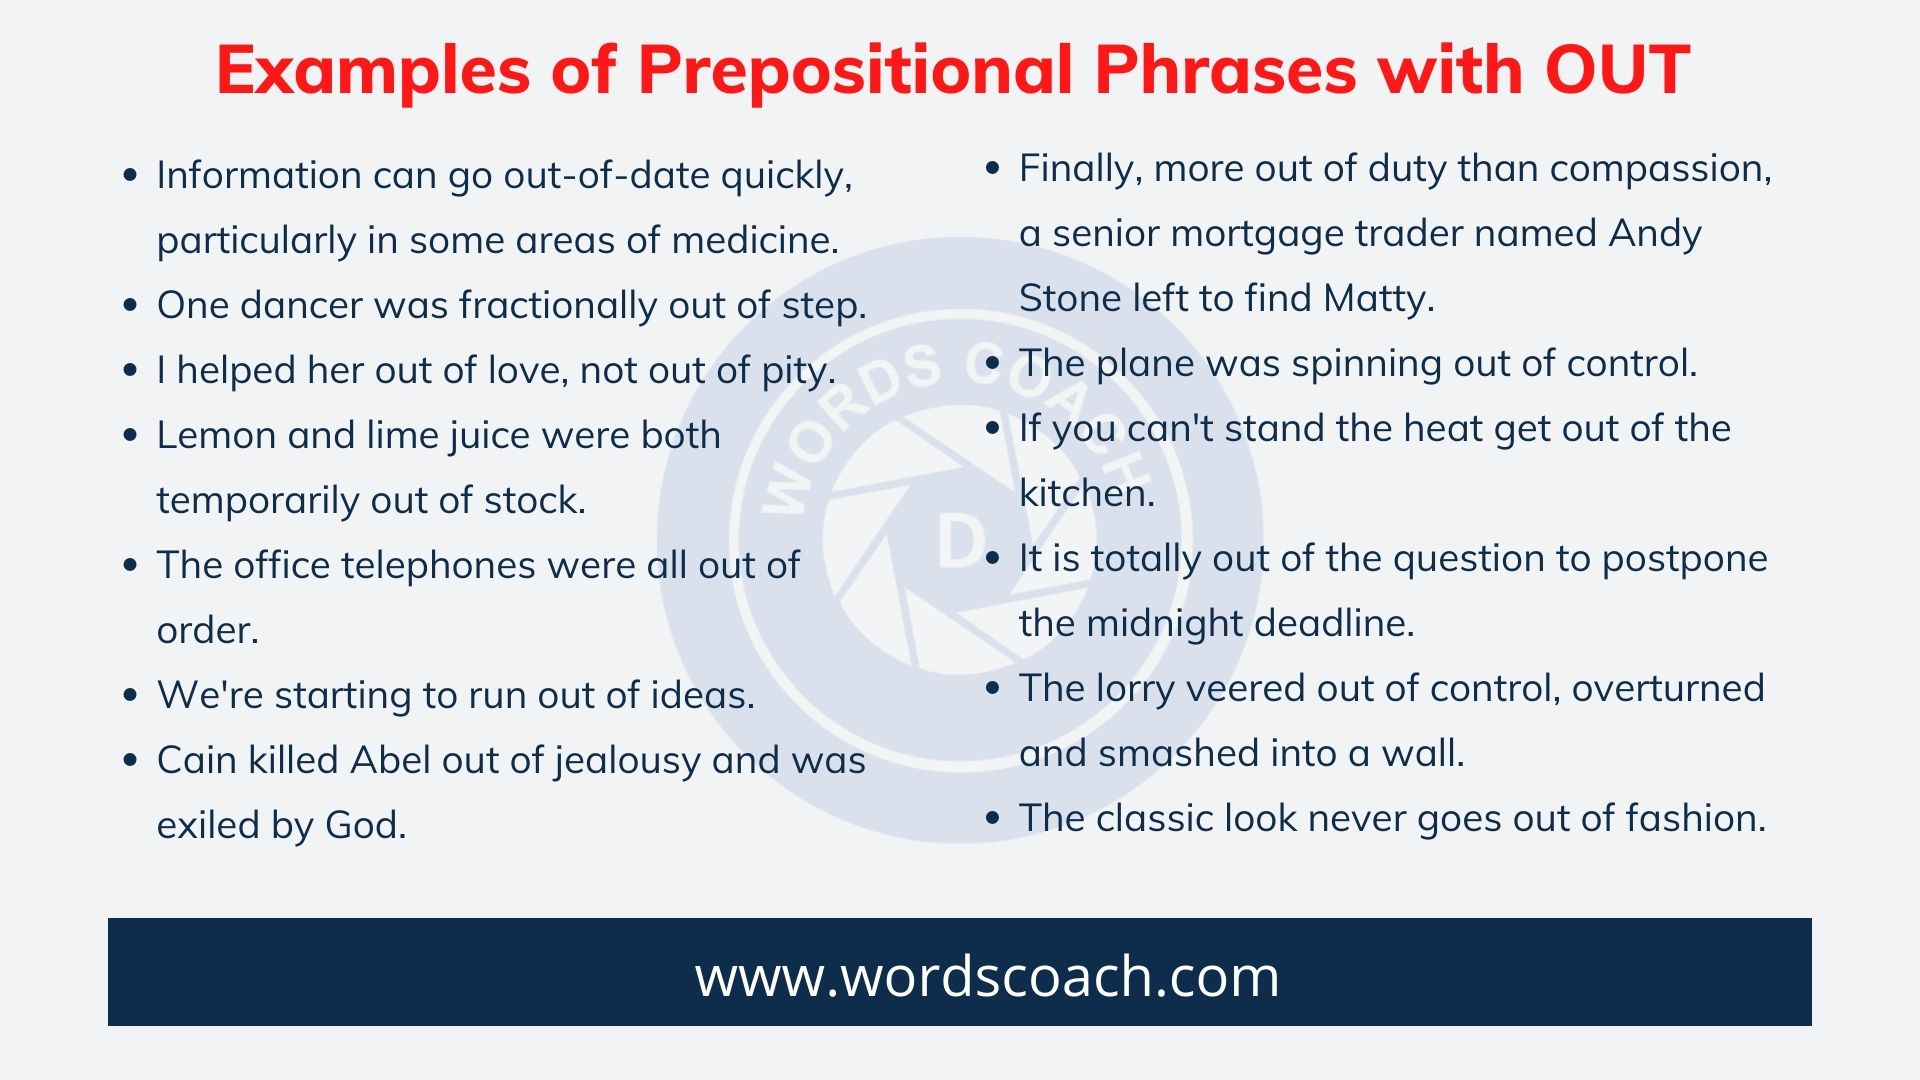 Examples of Prepositional Phrases with OUT - wordscoach.com